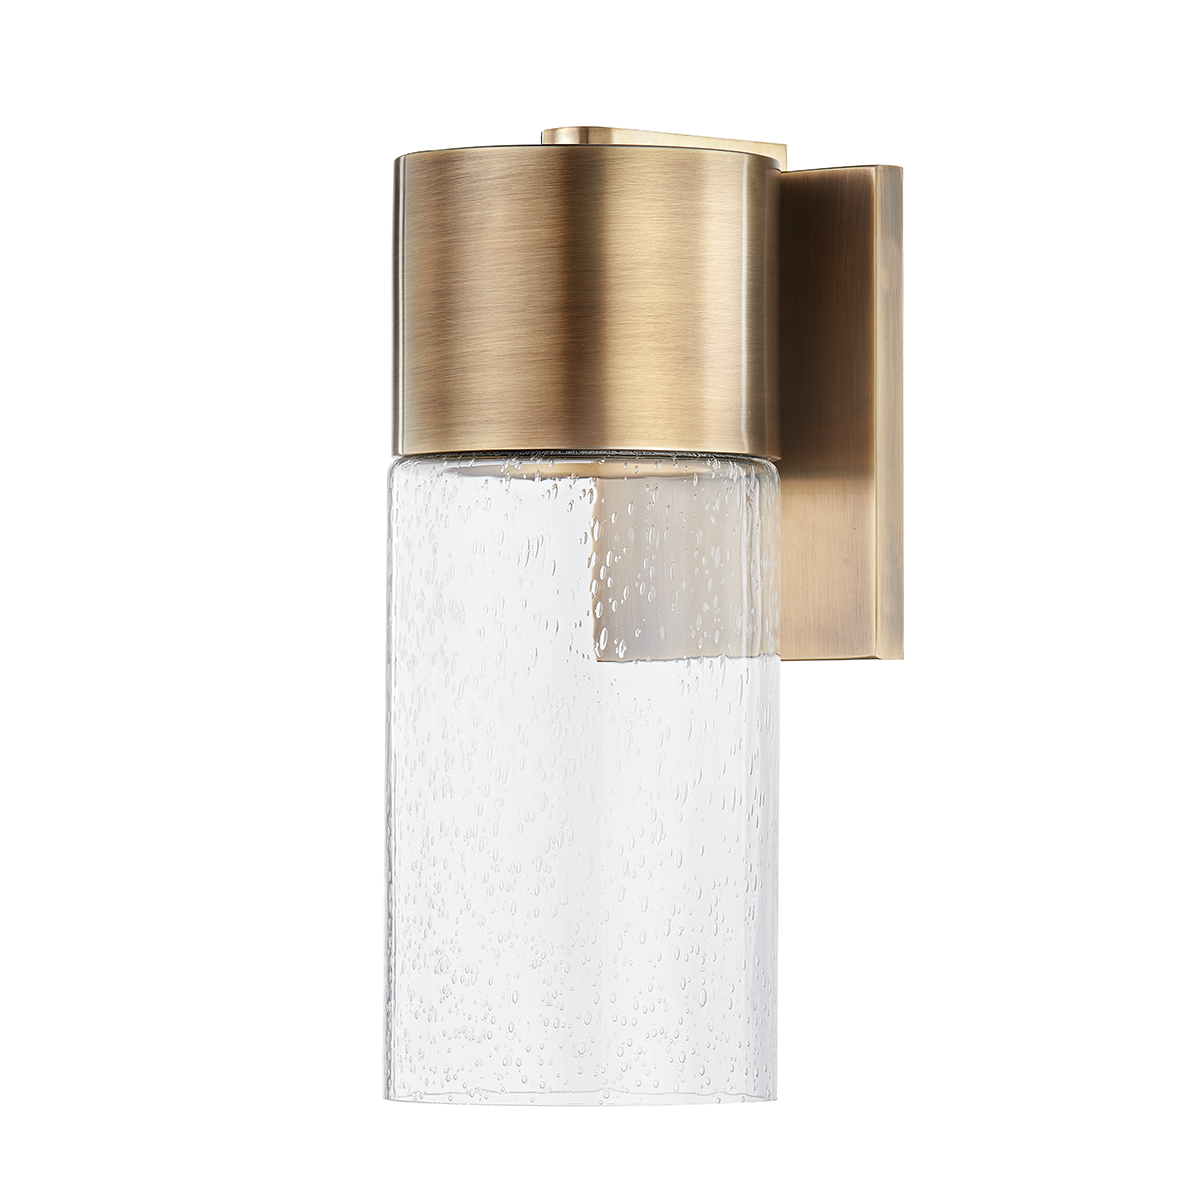 Troy Lighting 1 LIGHT LARGE EXTERIOR WALL SCONCE B5117 Outdoor l Wall Troy Lighting PATINA BRASS  